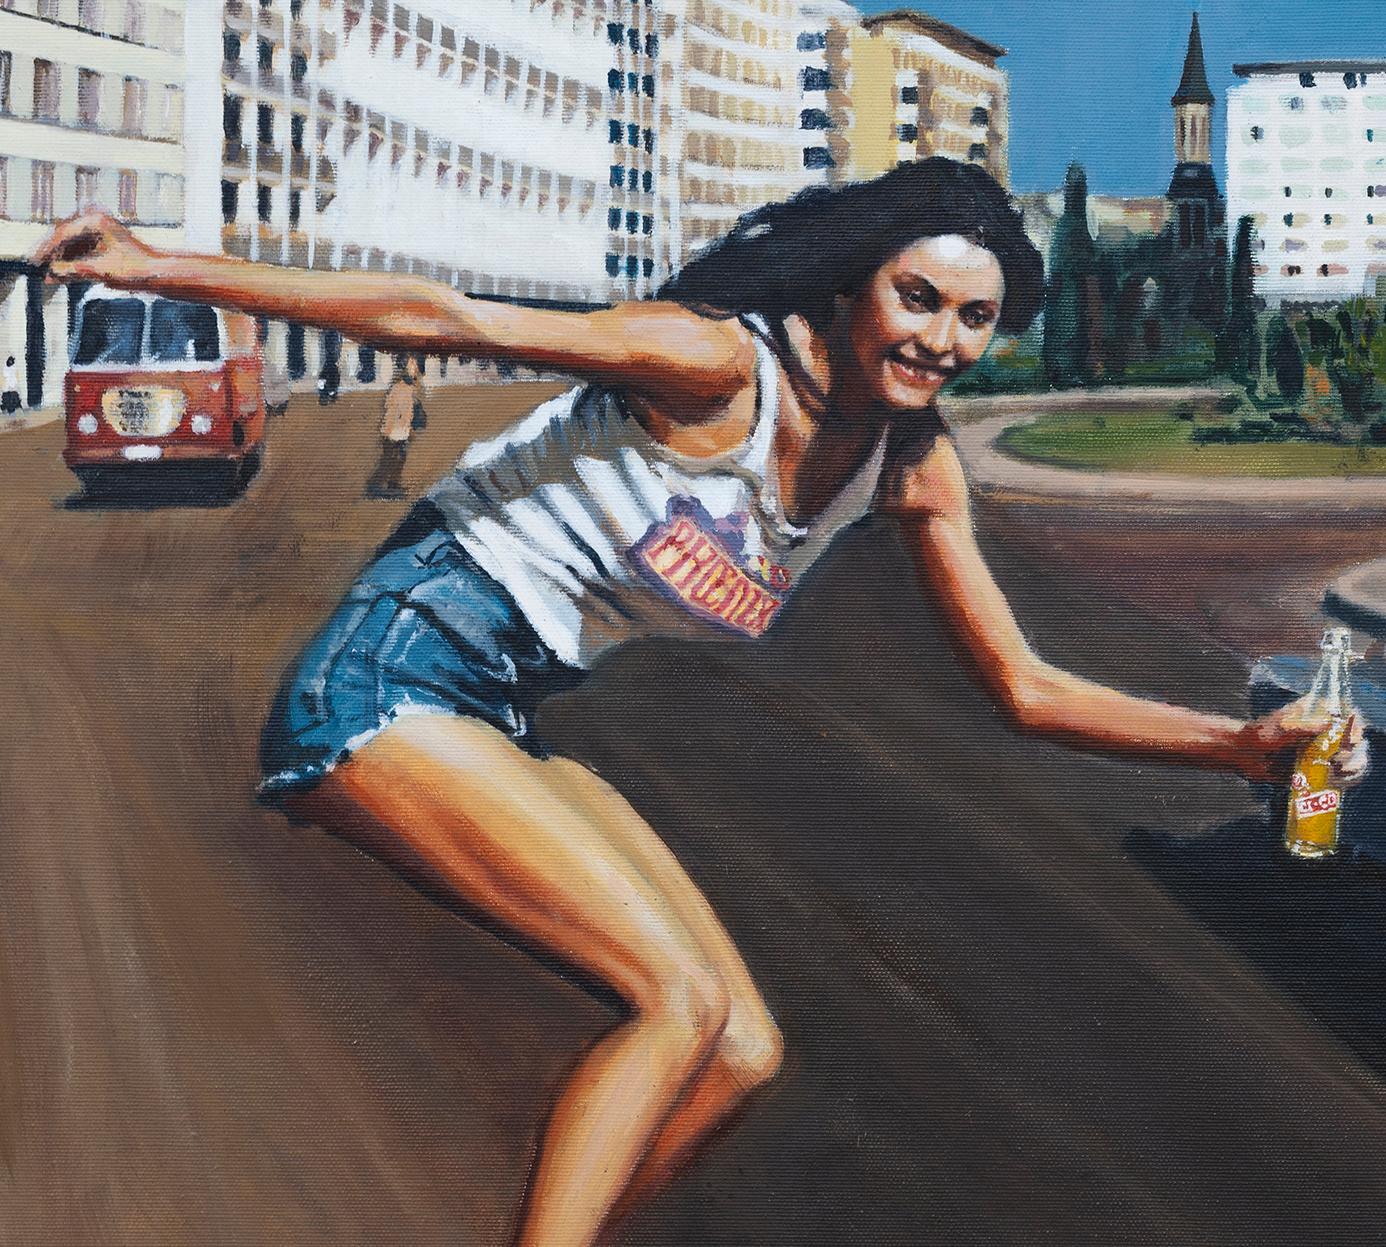 Riding On Change - 21st Century, Cityscape, Woman, Contemporary, Skateboard - Painting by Mihai Florea